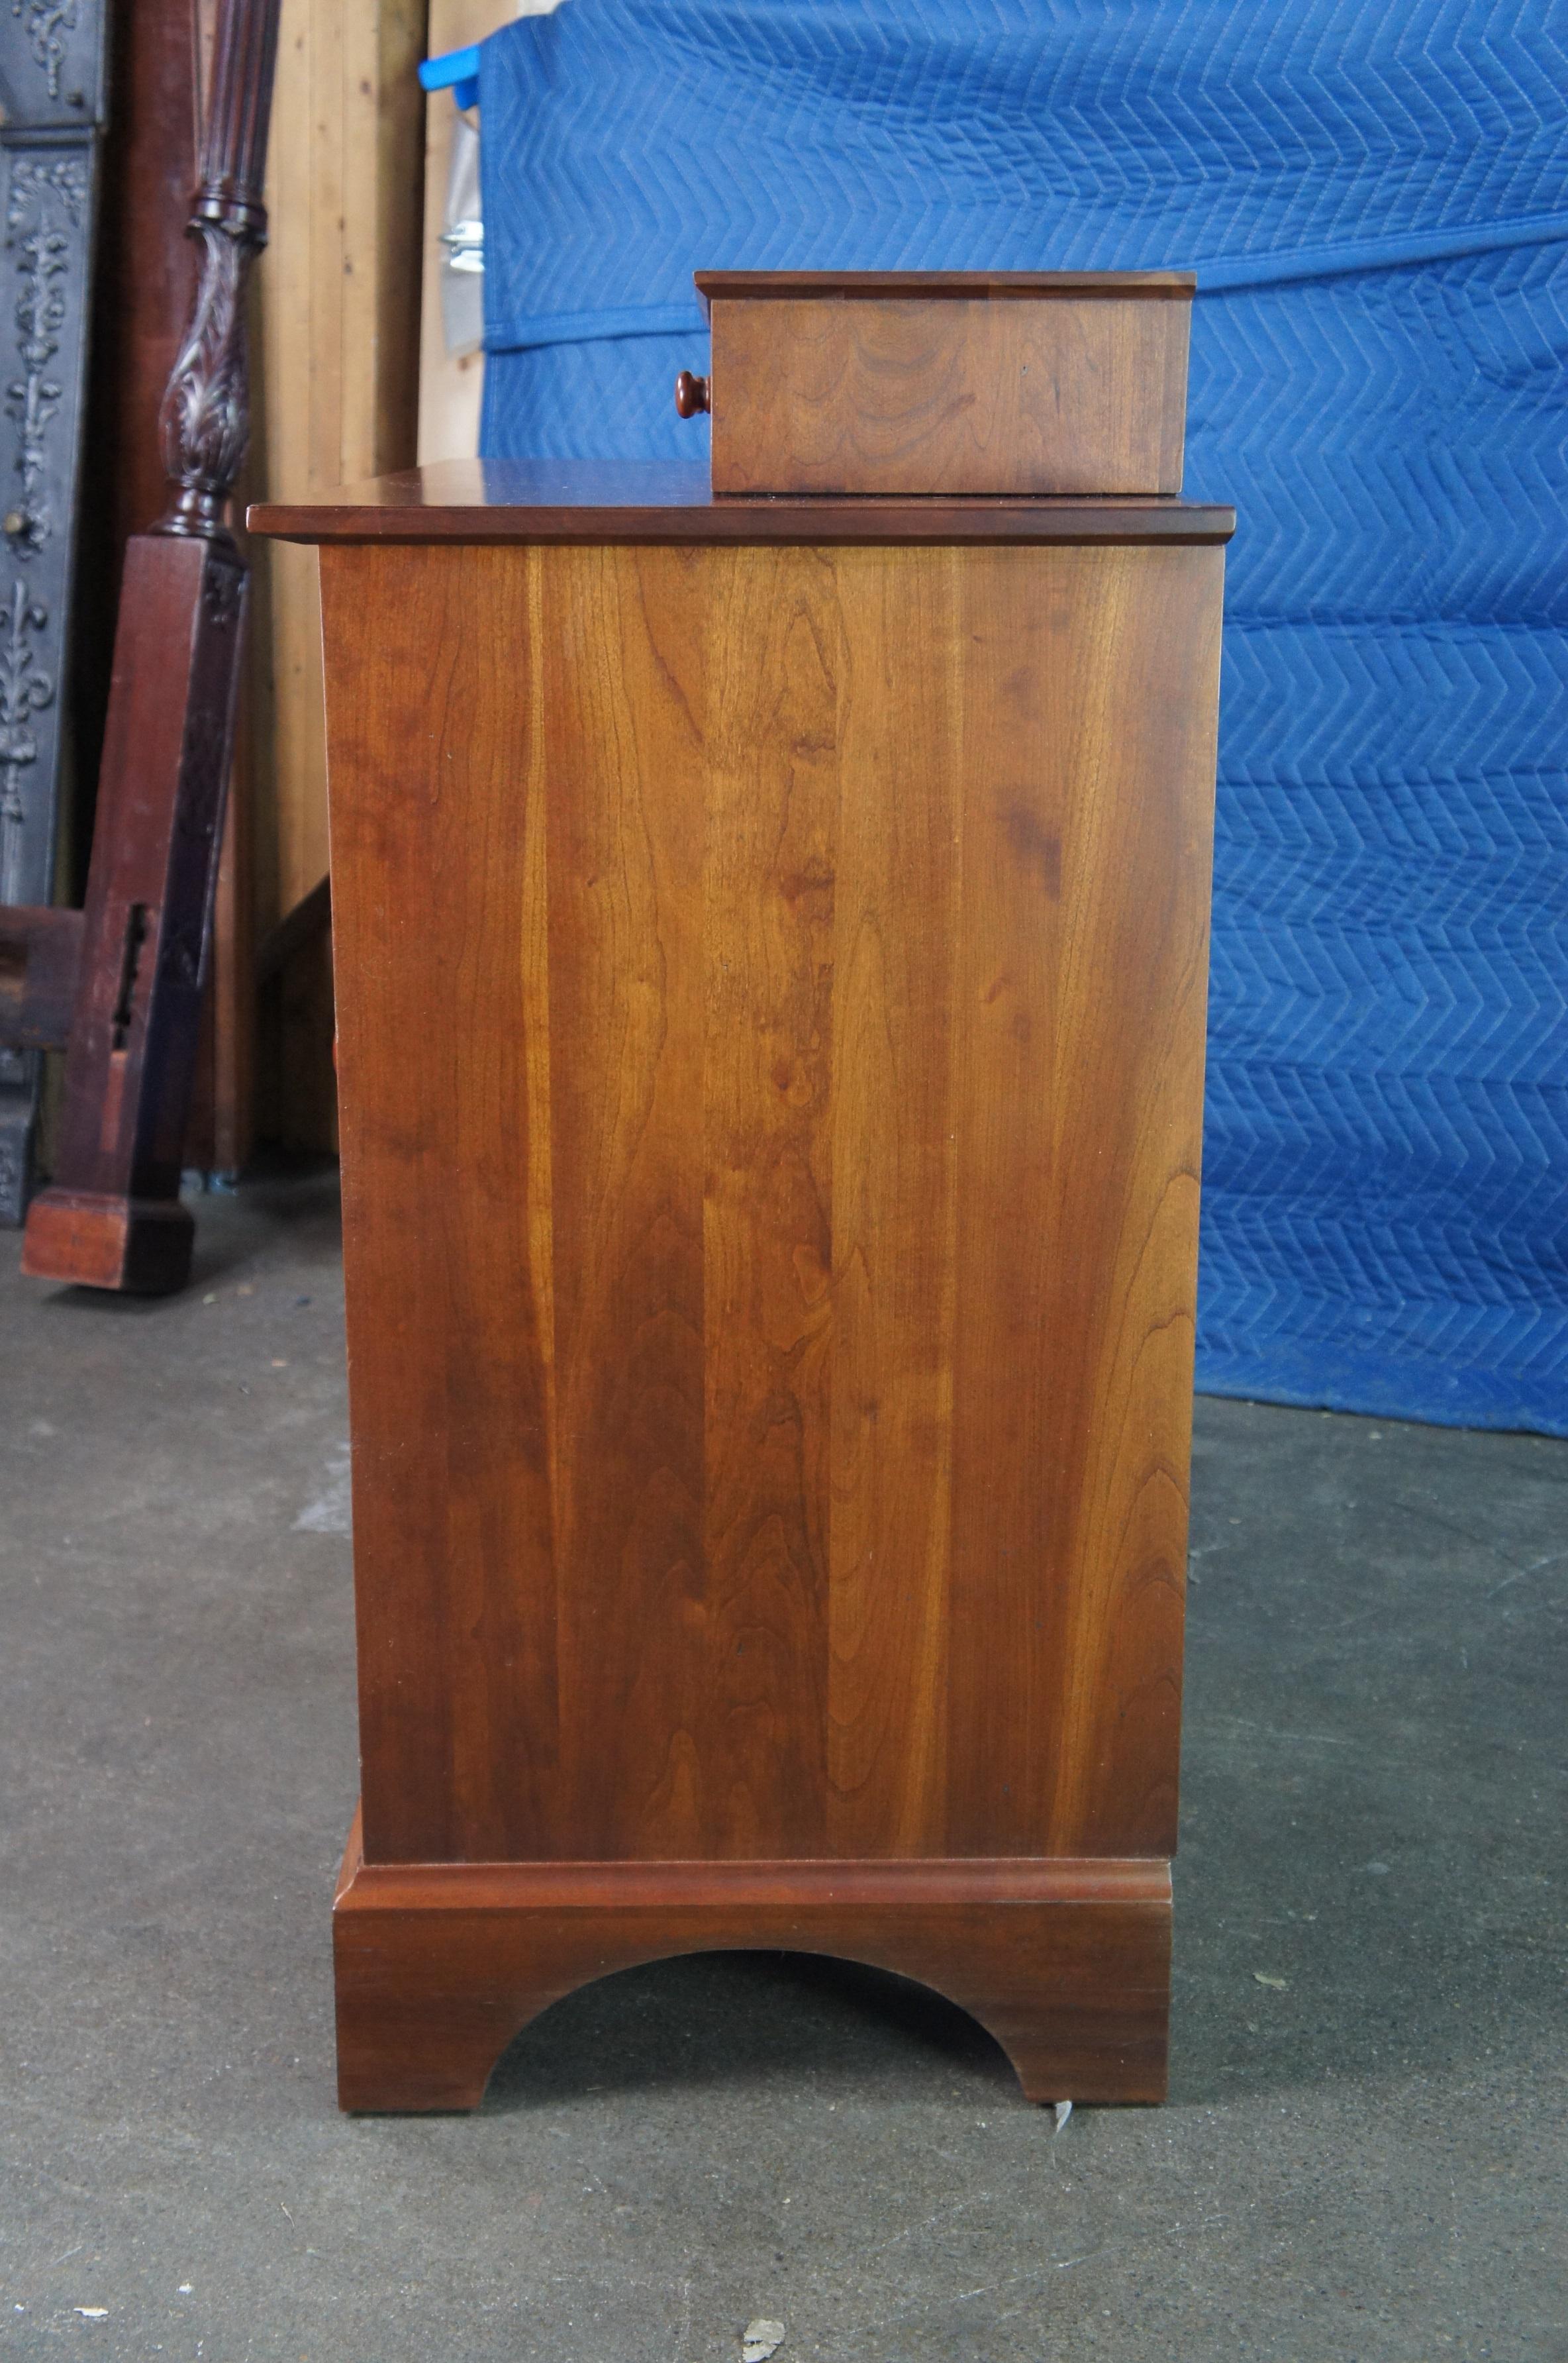 Late 20th Century 1993 Ethan Allen American Impressions Cherry Chest of Drawers Dresser 24-5401